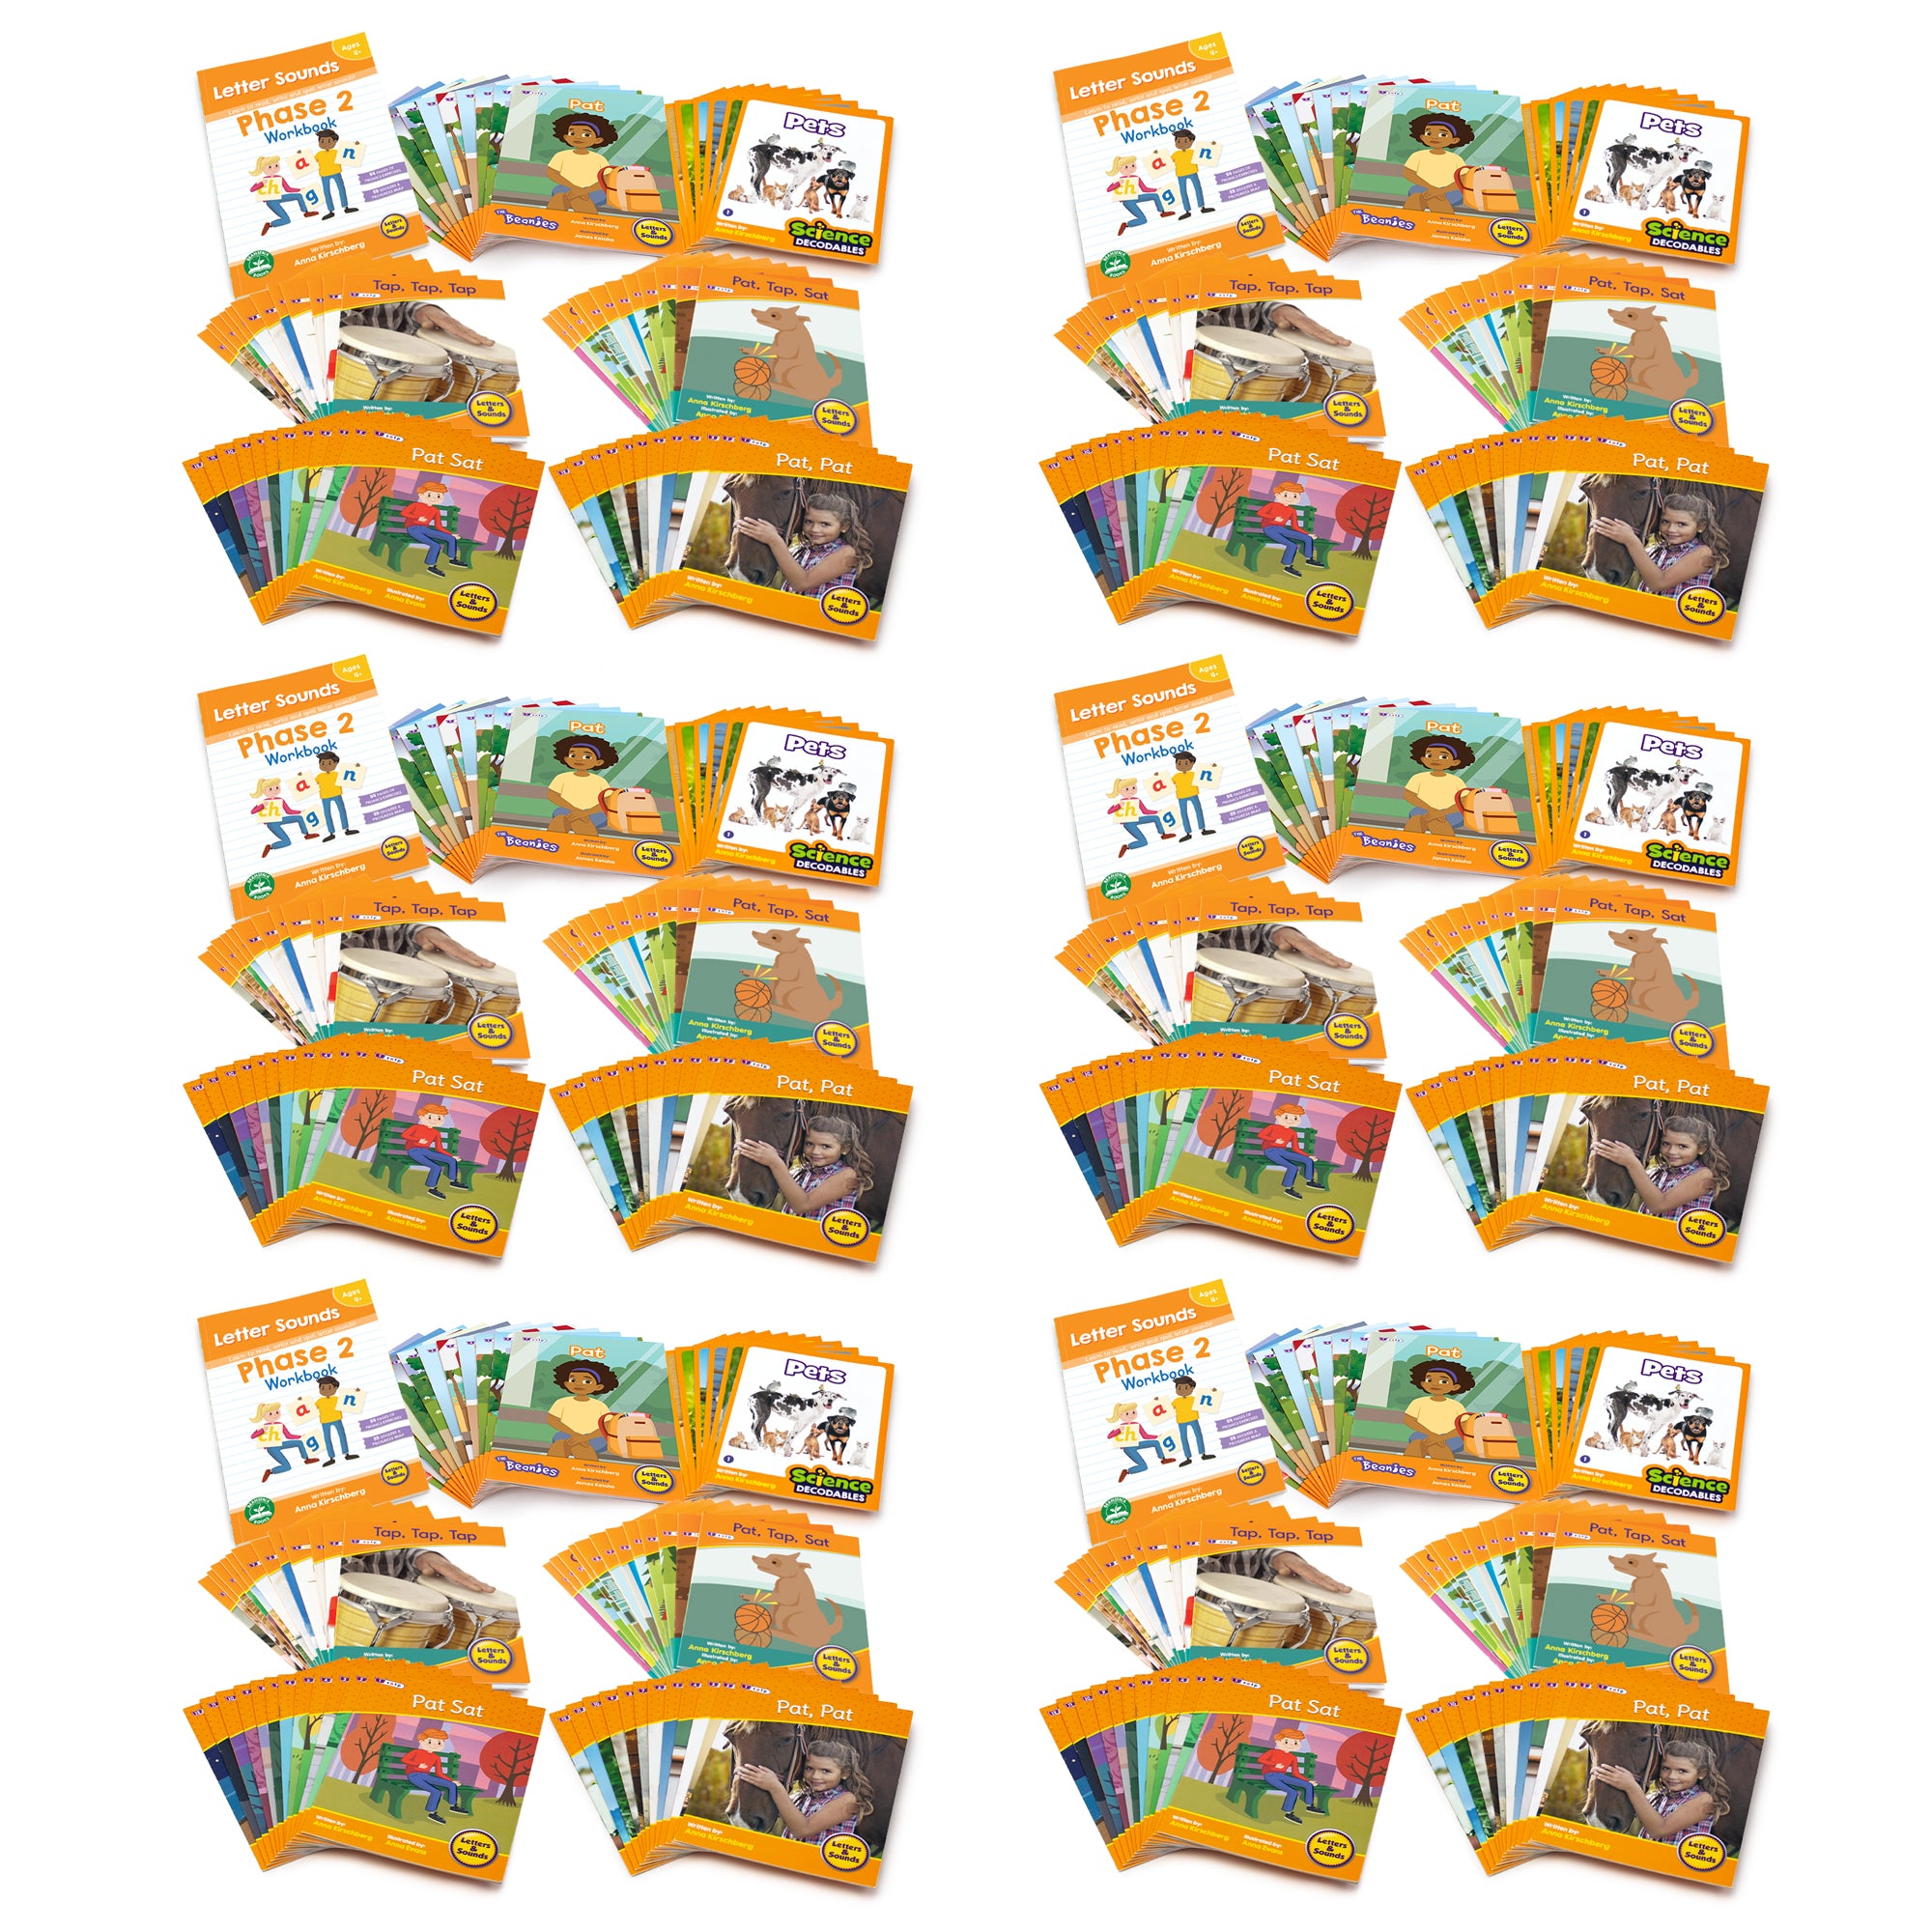 Letters and Sounds Phase 2 Letter Sounds Classroom Kit